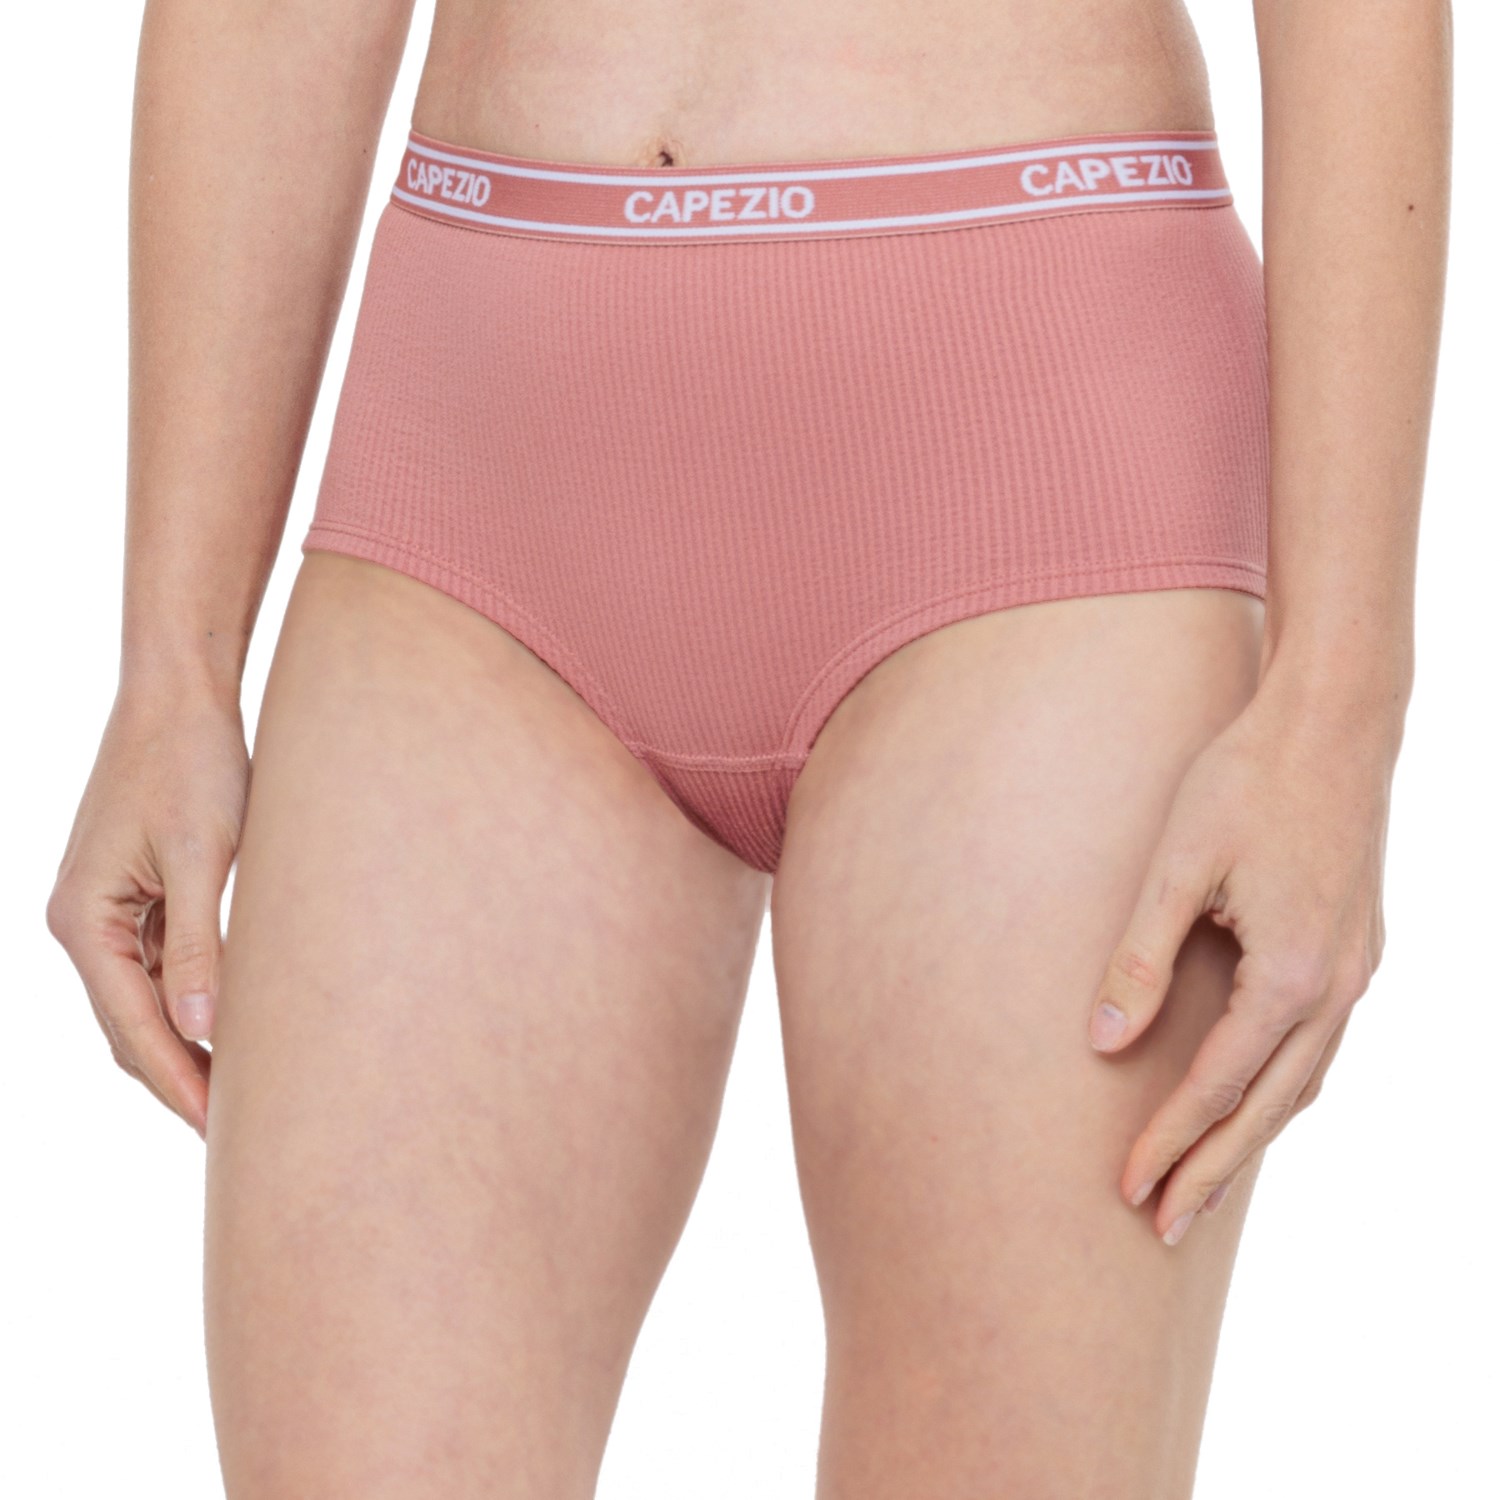 CAPEZIO Ribbed Seamless Shortie Panties - 3-Pack, Boy Shorts - Save 50%